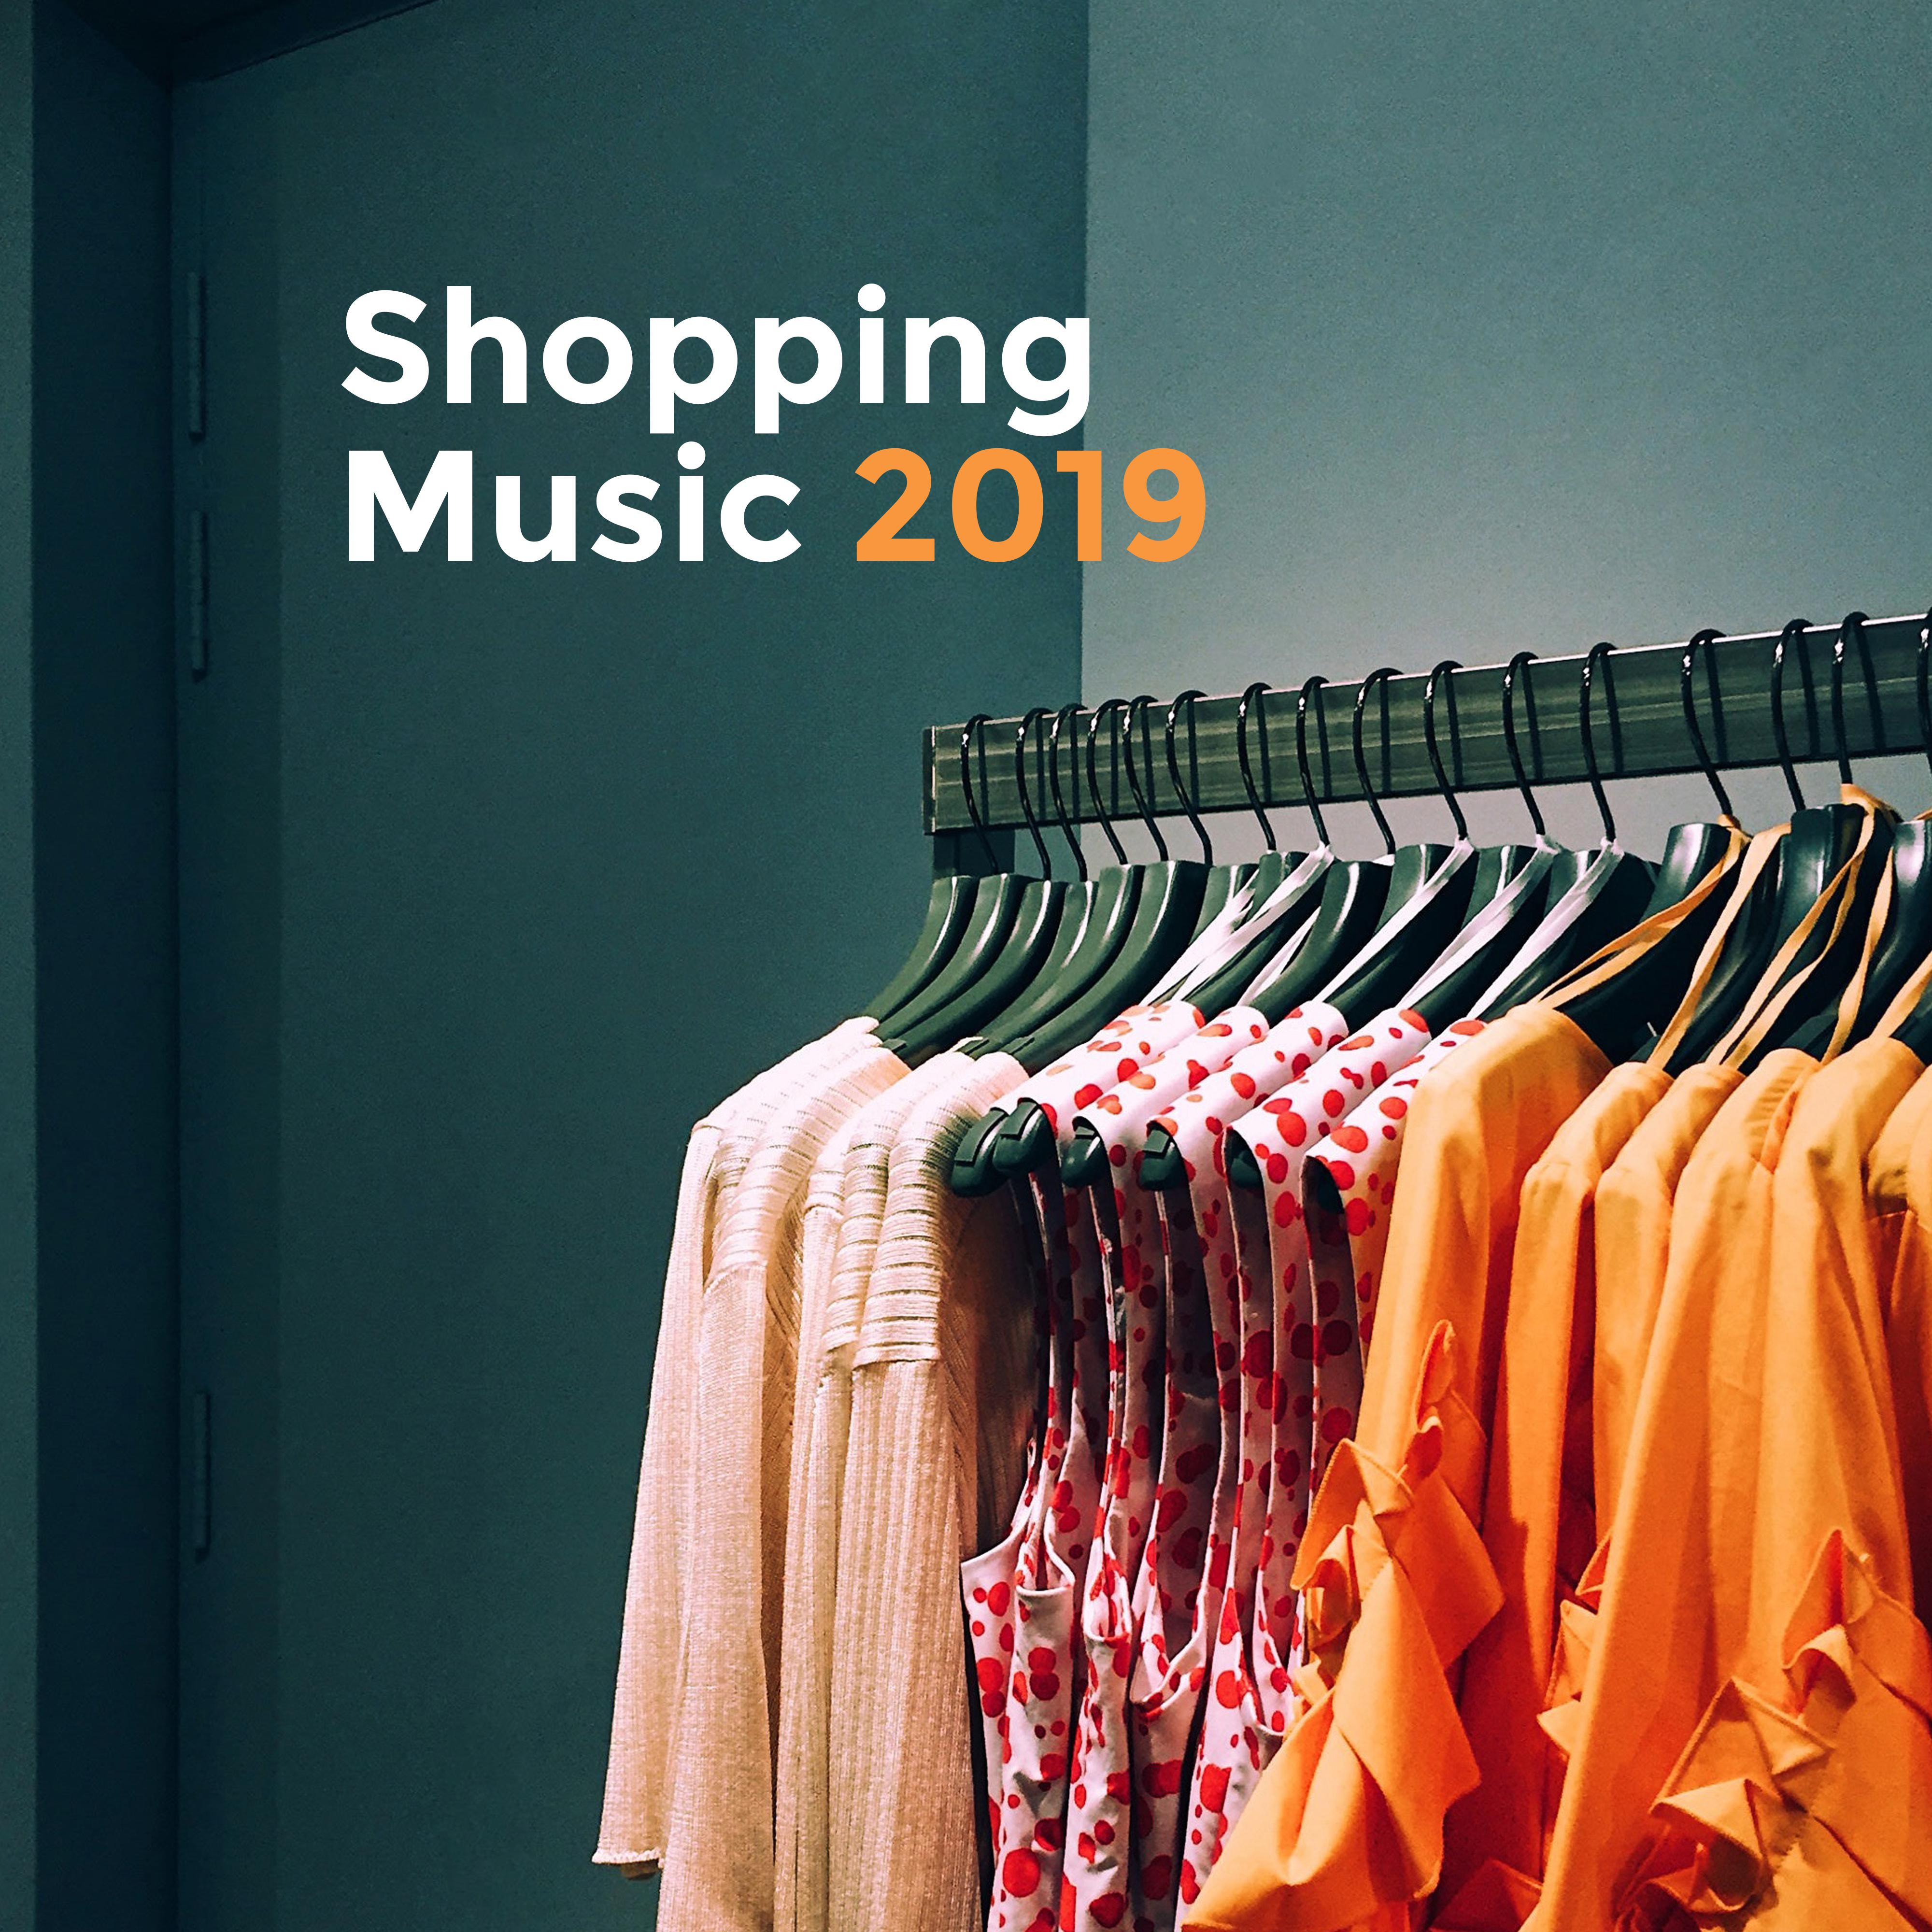 Shopping Music 2019  Relaxing Beats for Shop, Chillout Shopping, Lounge Music, Relax After Work